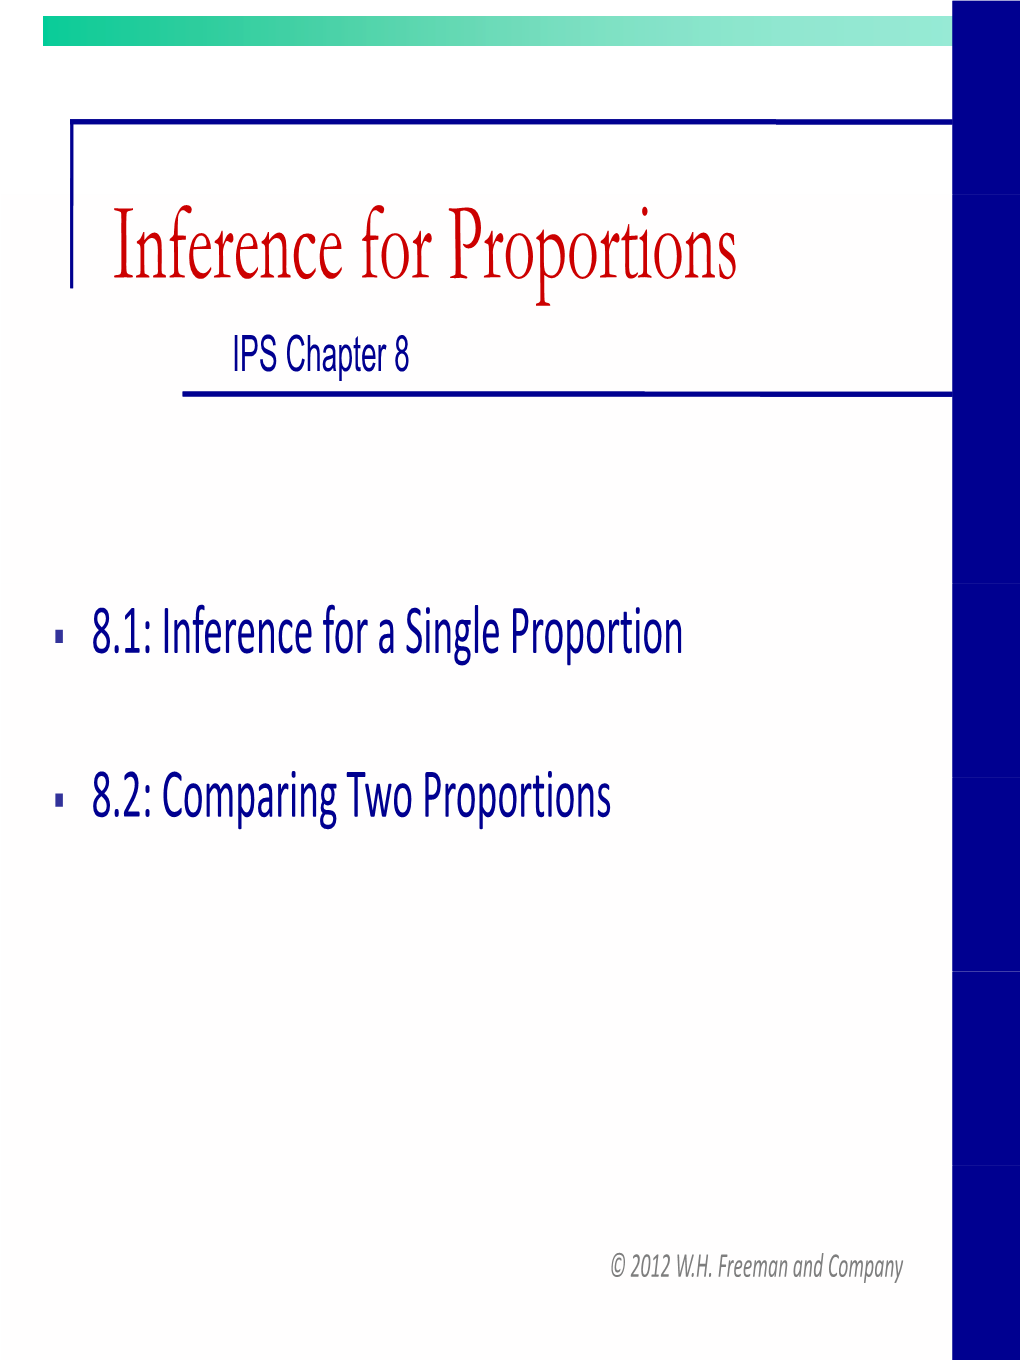 Inference for Proportions IPS Chapter 8